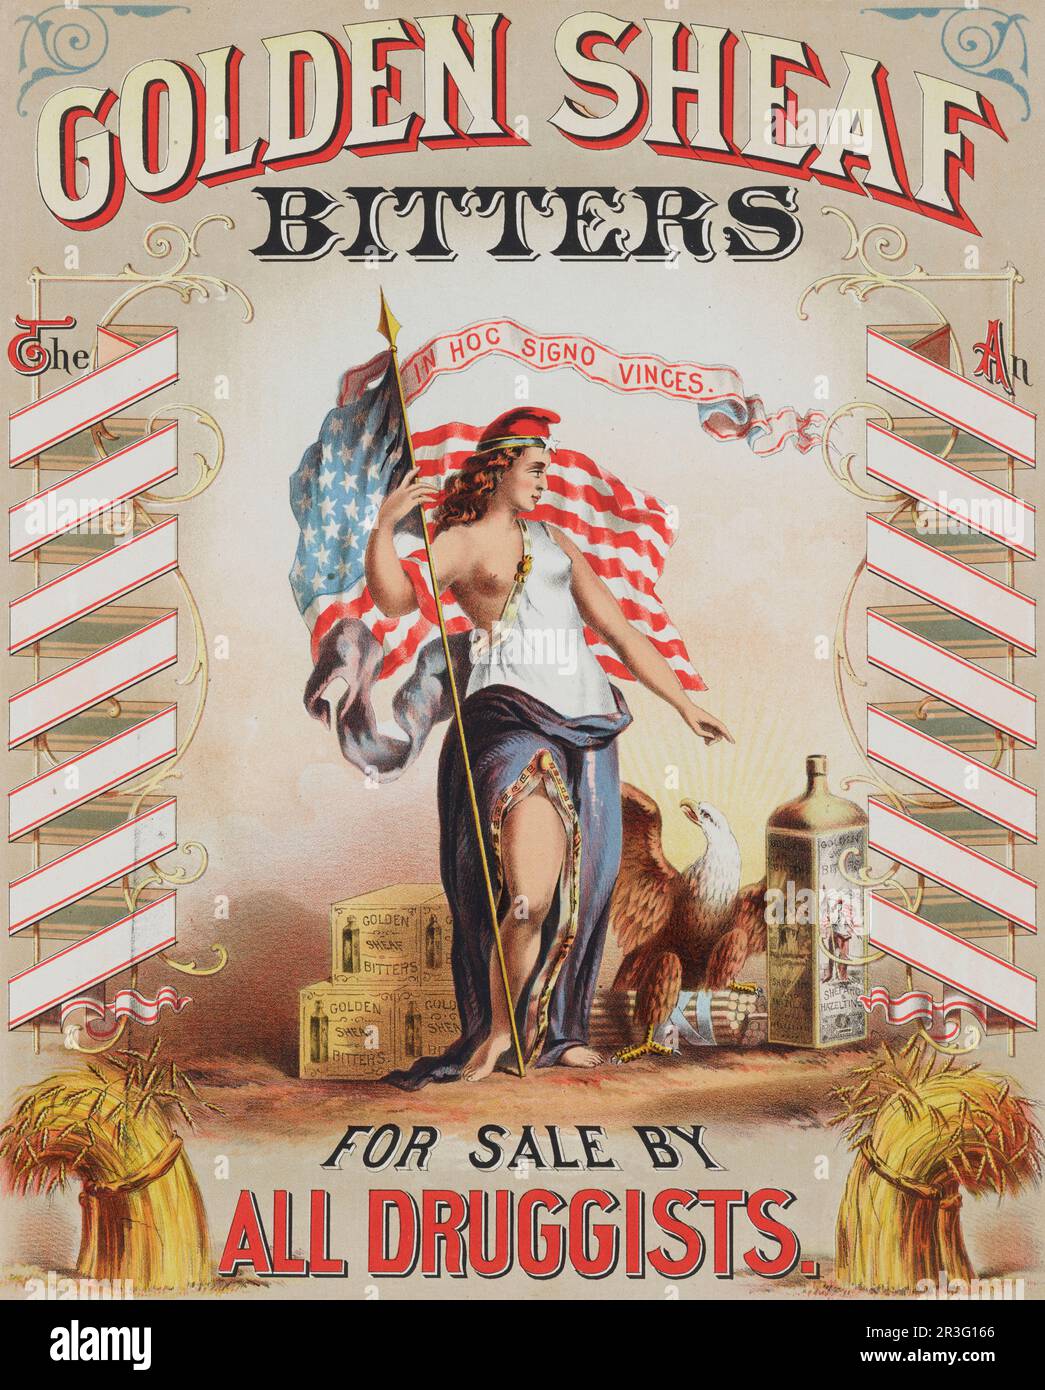 Vintage advertisement for Golden Sheaf Bitters featuring goddess Columbia with an American flag. Stock Photo